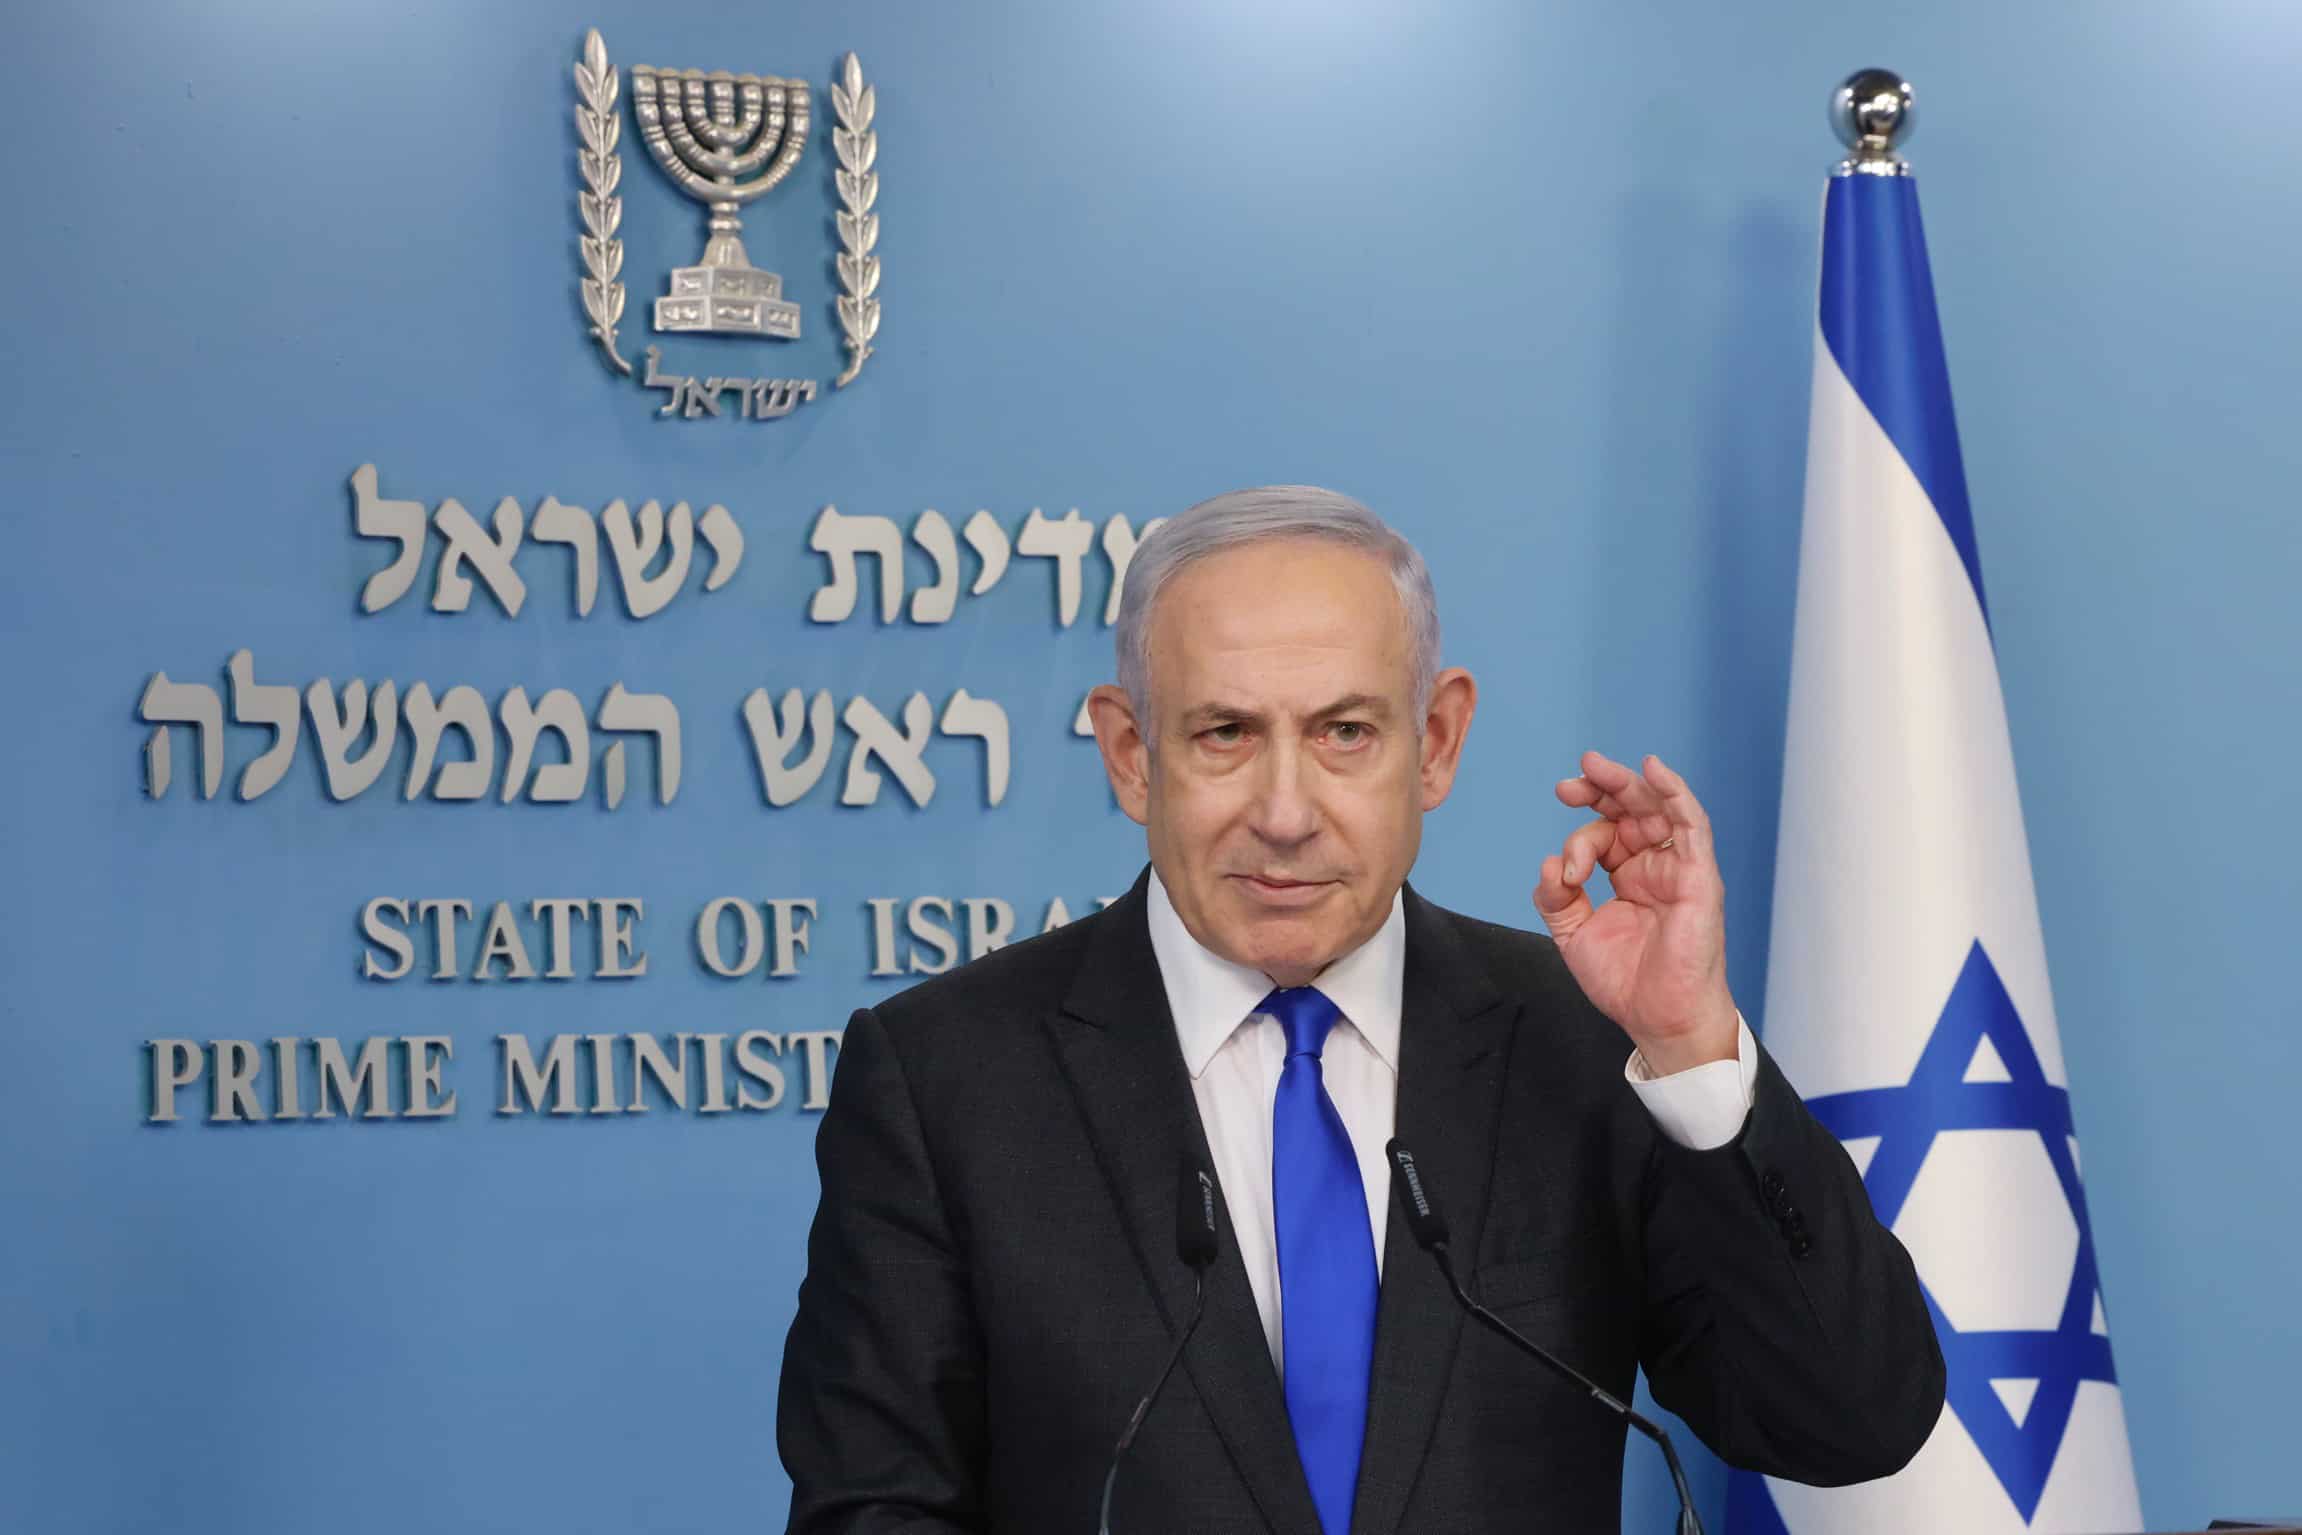 Netanyahu: Date set for IDF offensive in Rafah, essential to victory